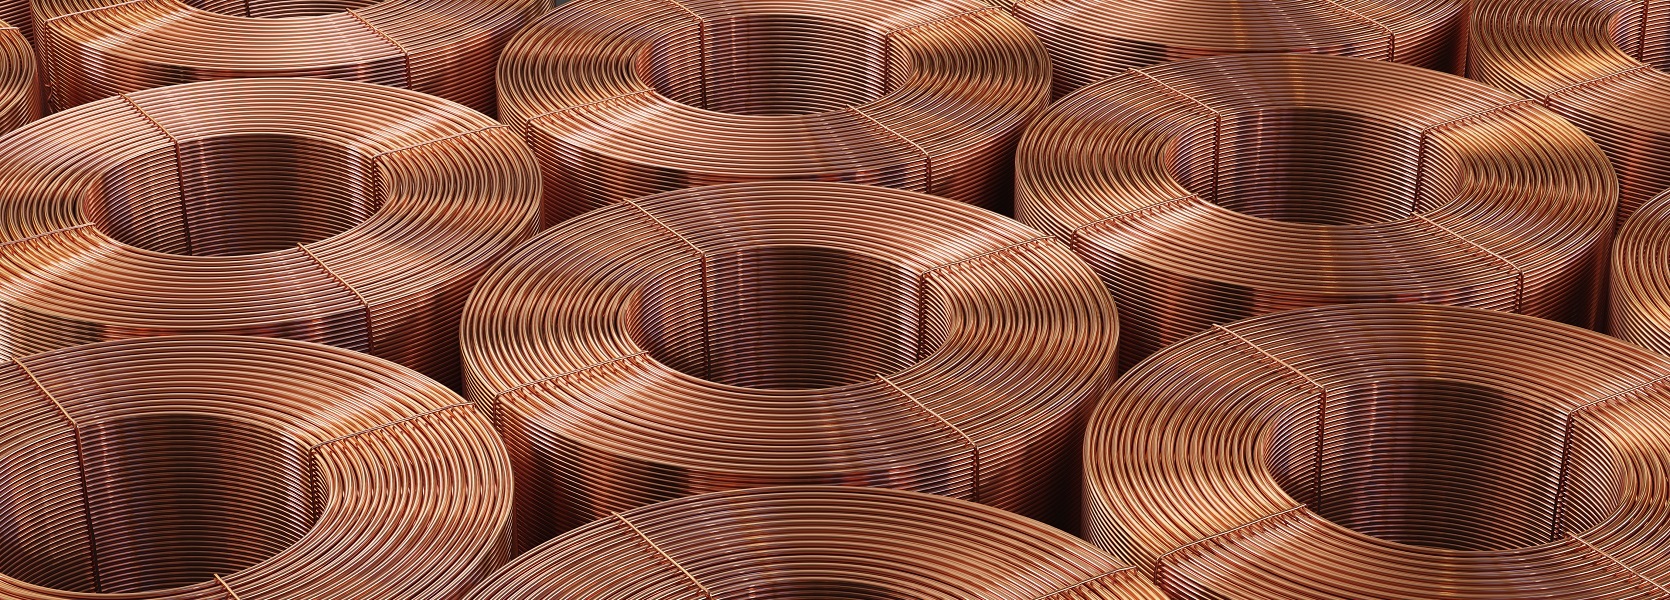 Image: Aktogay Copper project: Concentrator designed for extreme temperatures